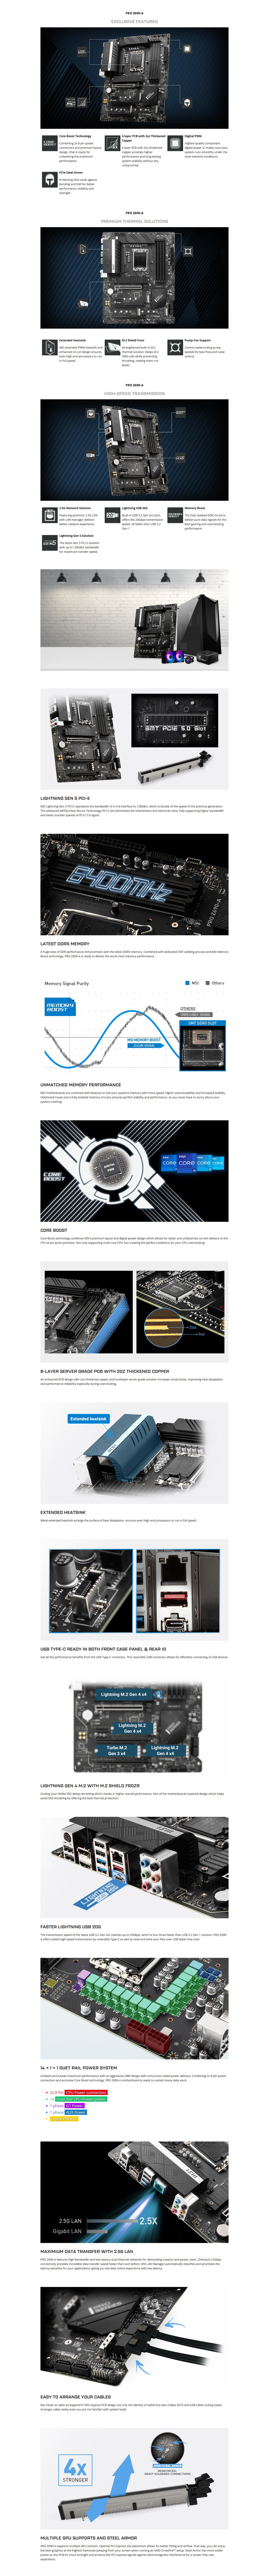 A large marketing image providing additional information about the product MSI PRO Z690-A LGA1700 ATX Desktop Motherboard - Additional alt info not provided